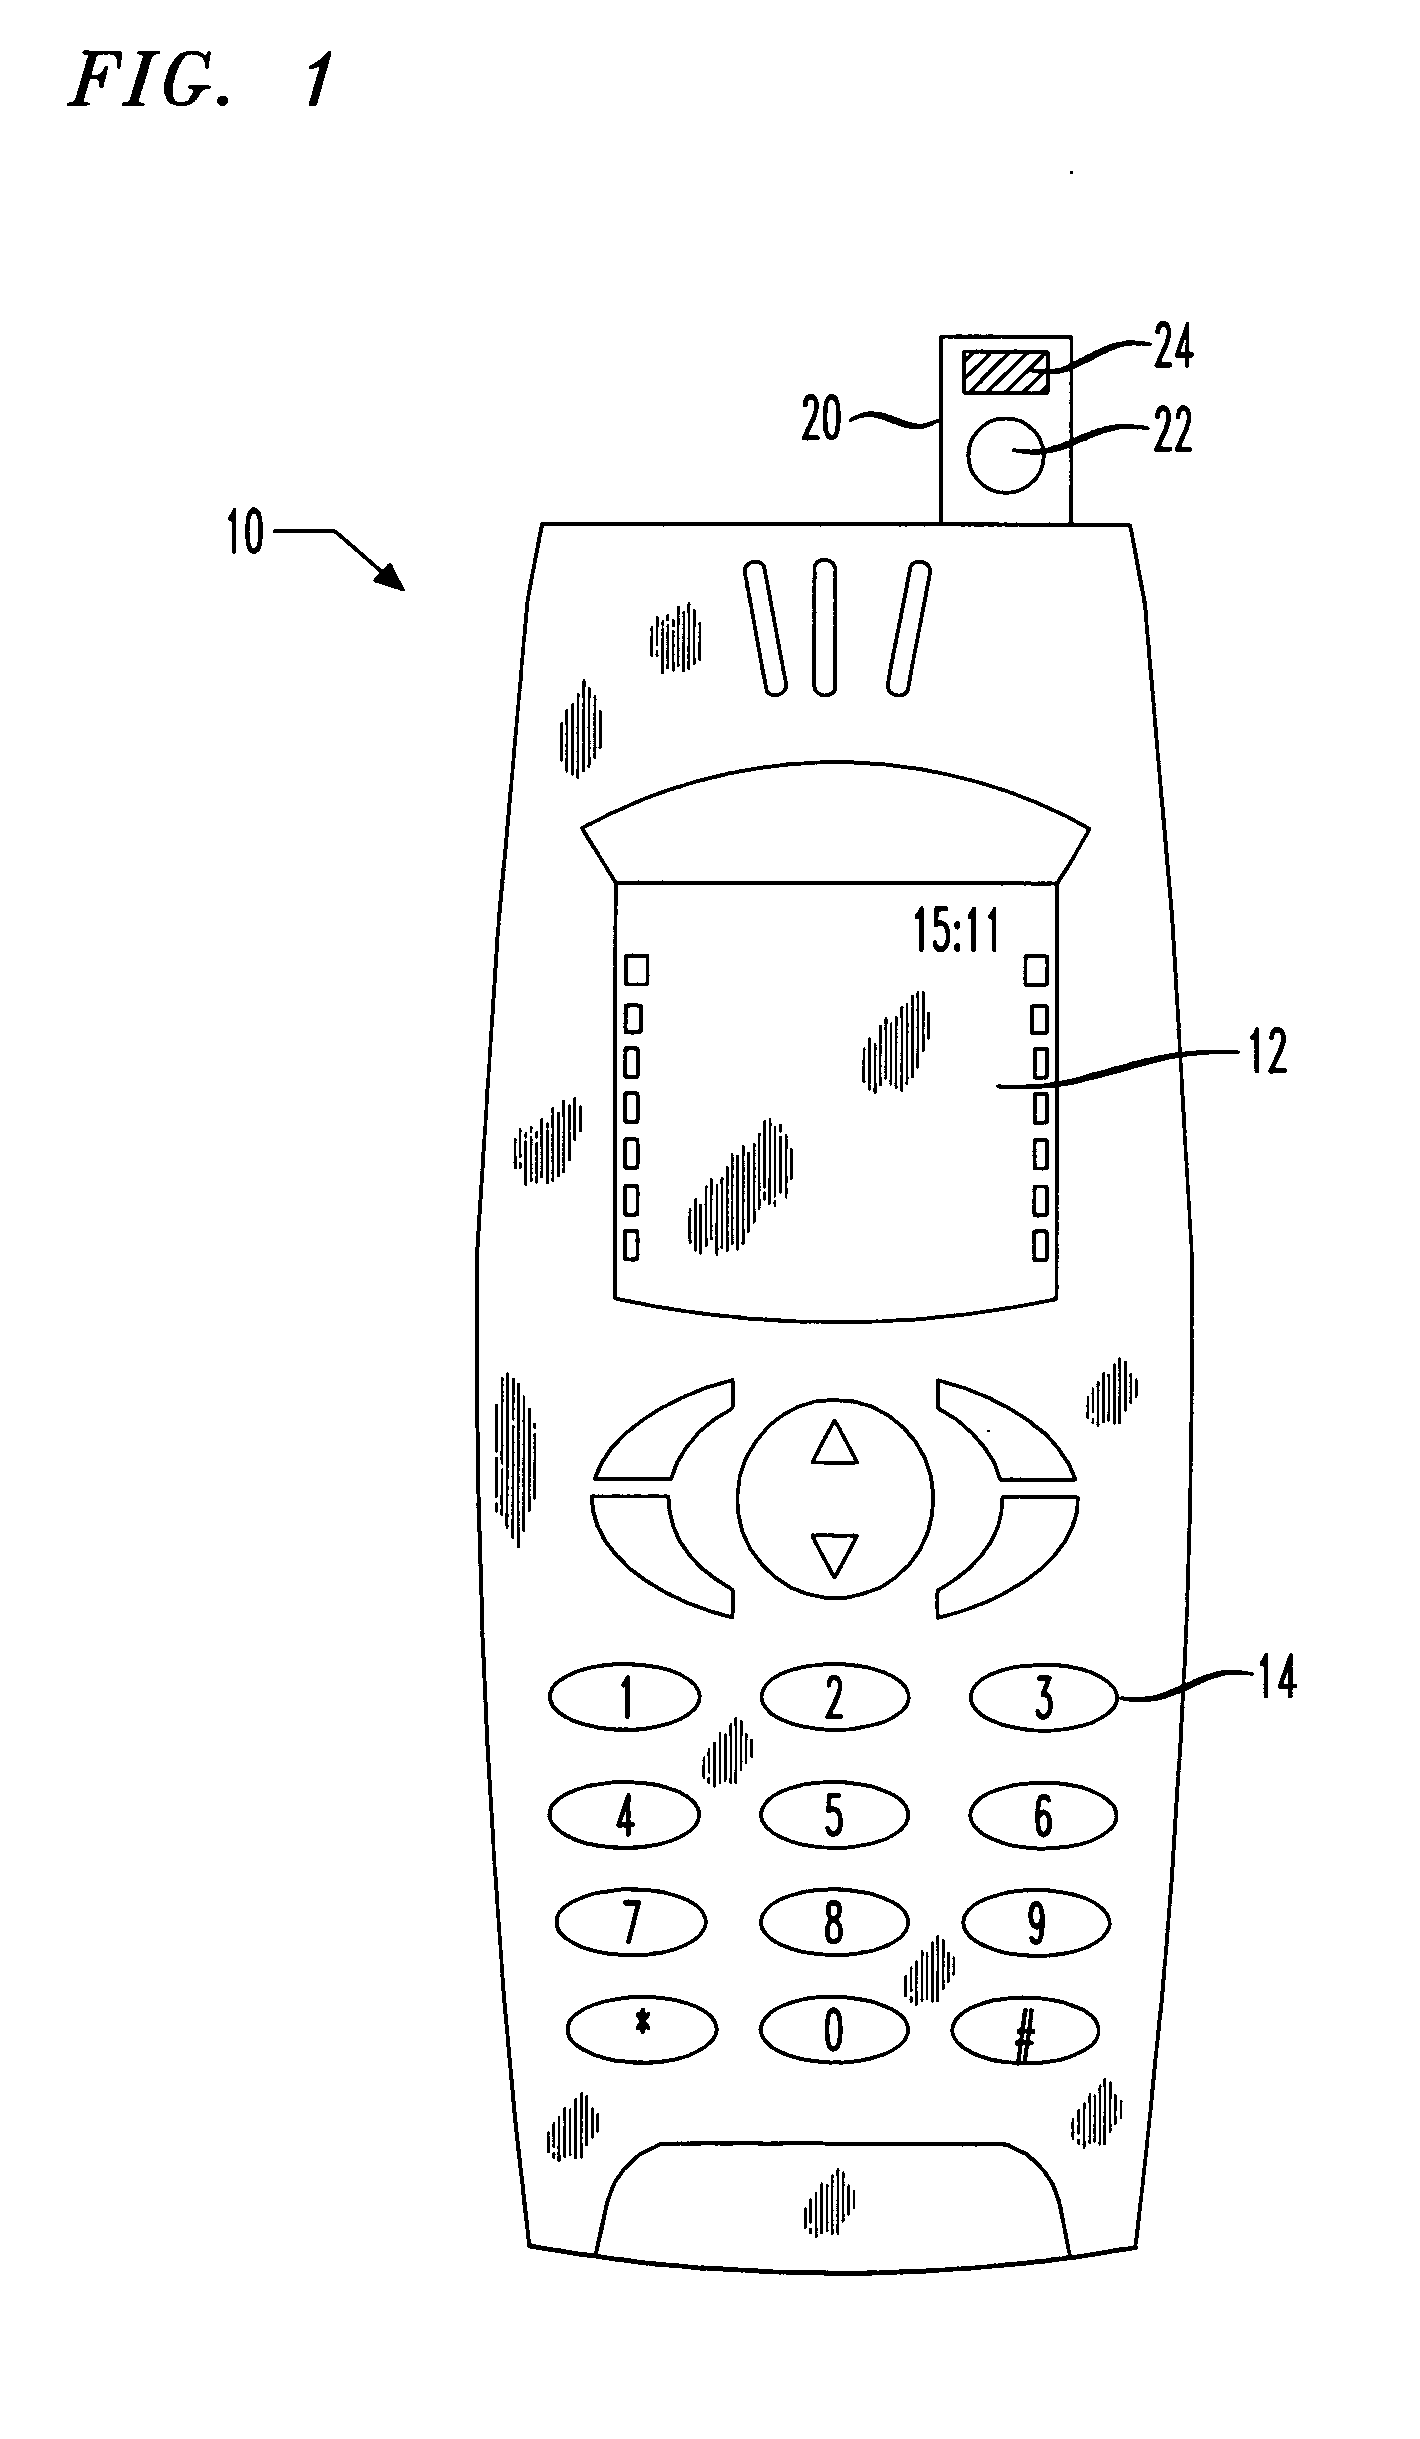 Method of using mobile communications devices for monitoring purposes and a system for implementation thereof